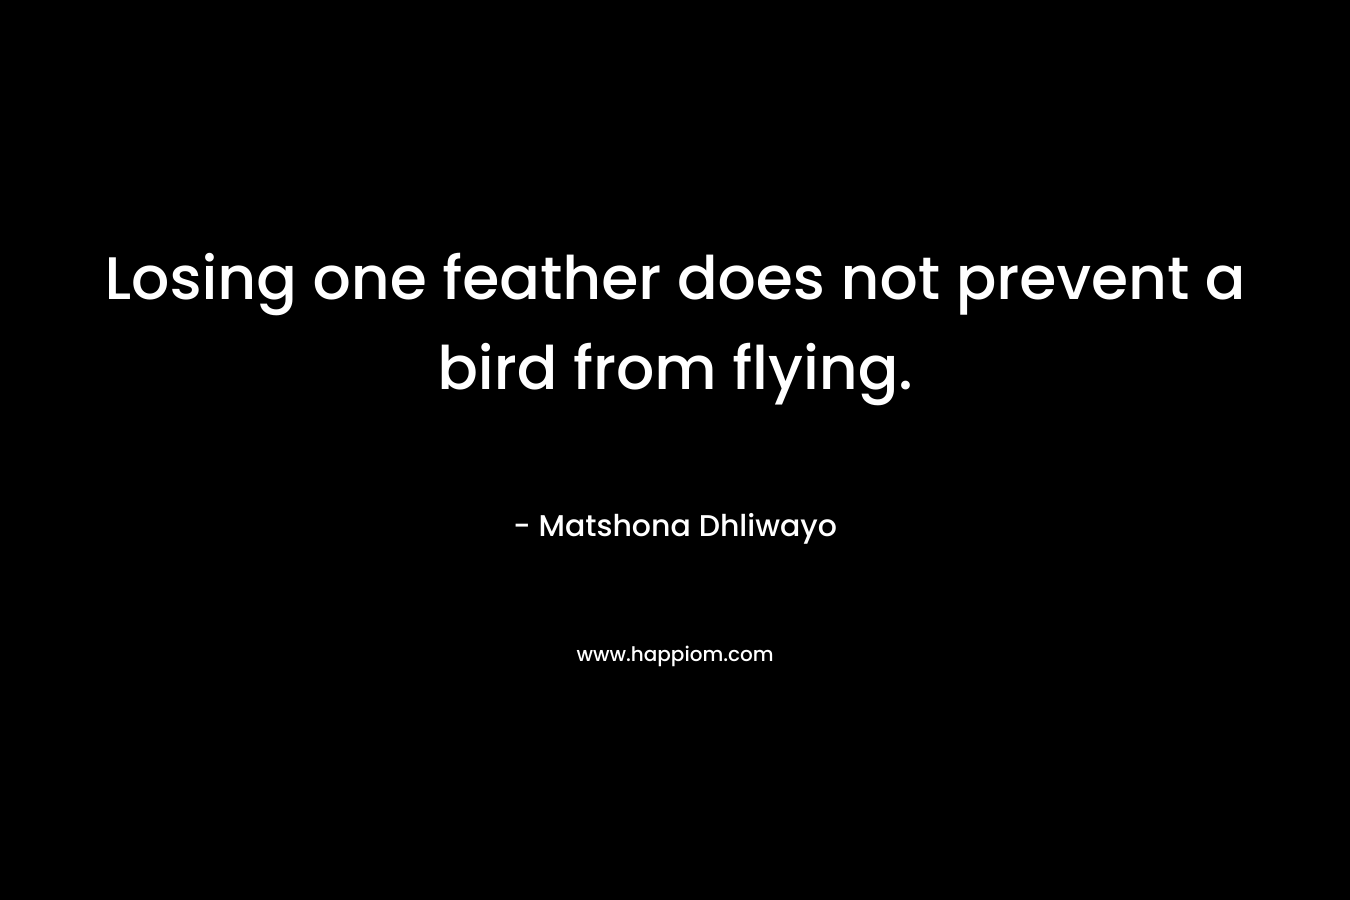 Losing one feather does not prevent a bird from flying.